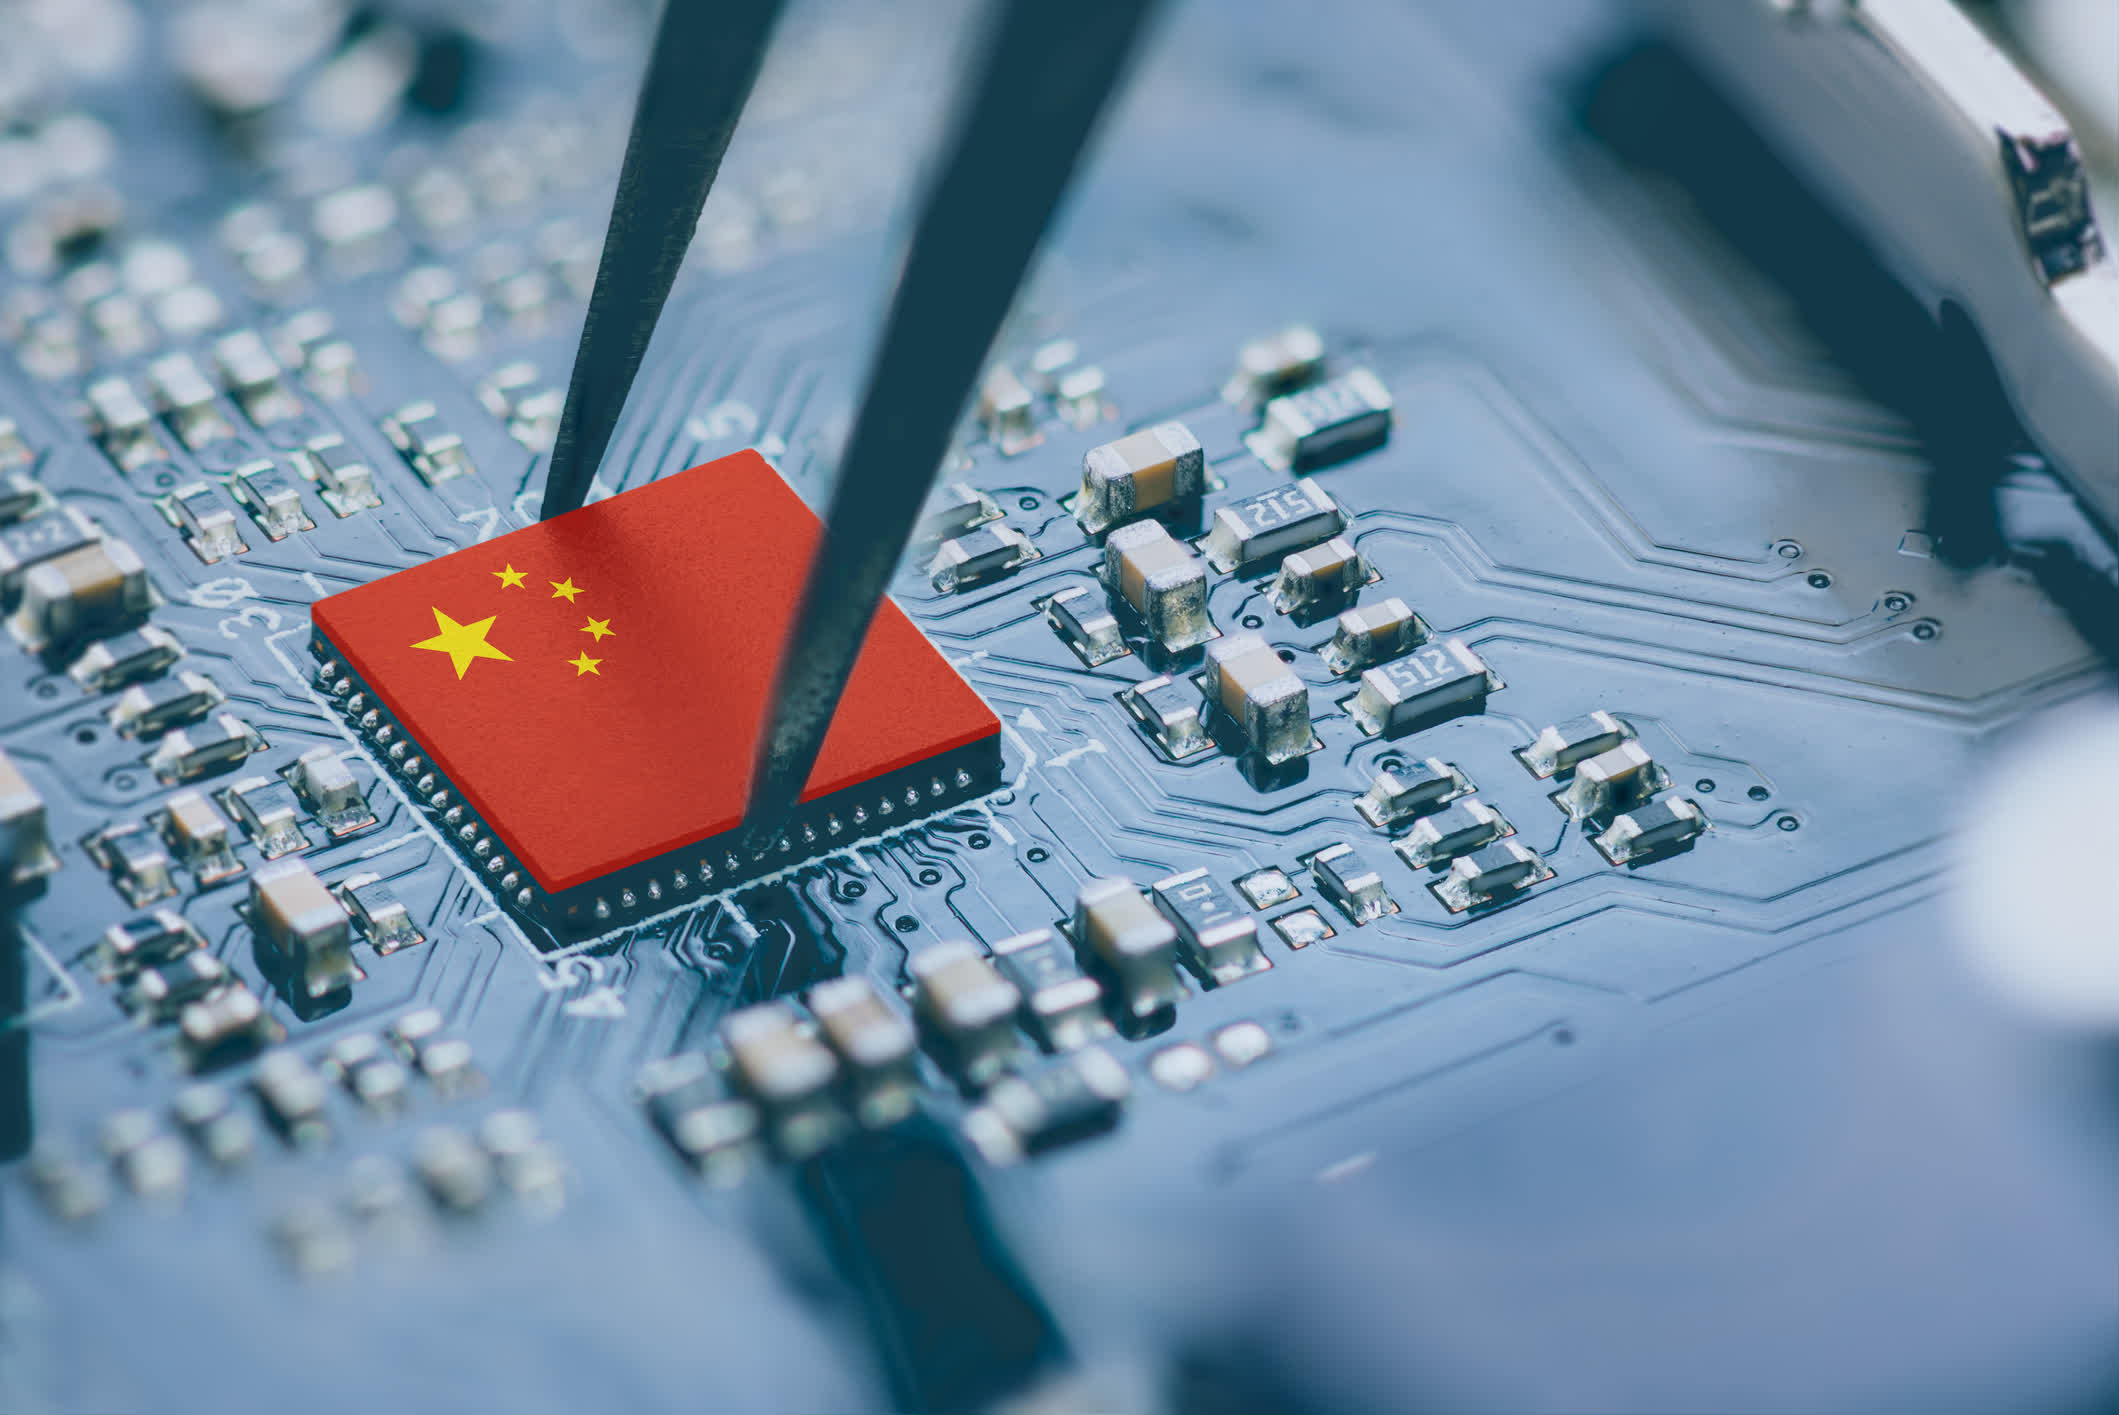 China complains about the CHIPS Act, again: claims double standards and Cold War mentality by the US